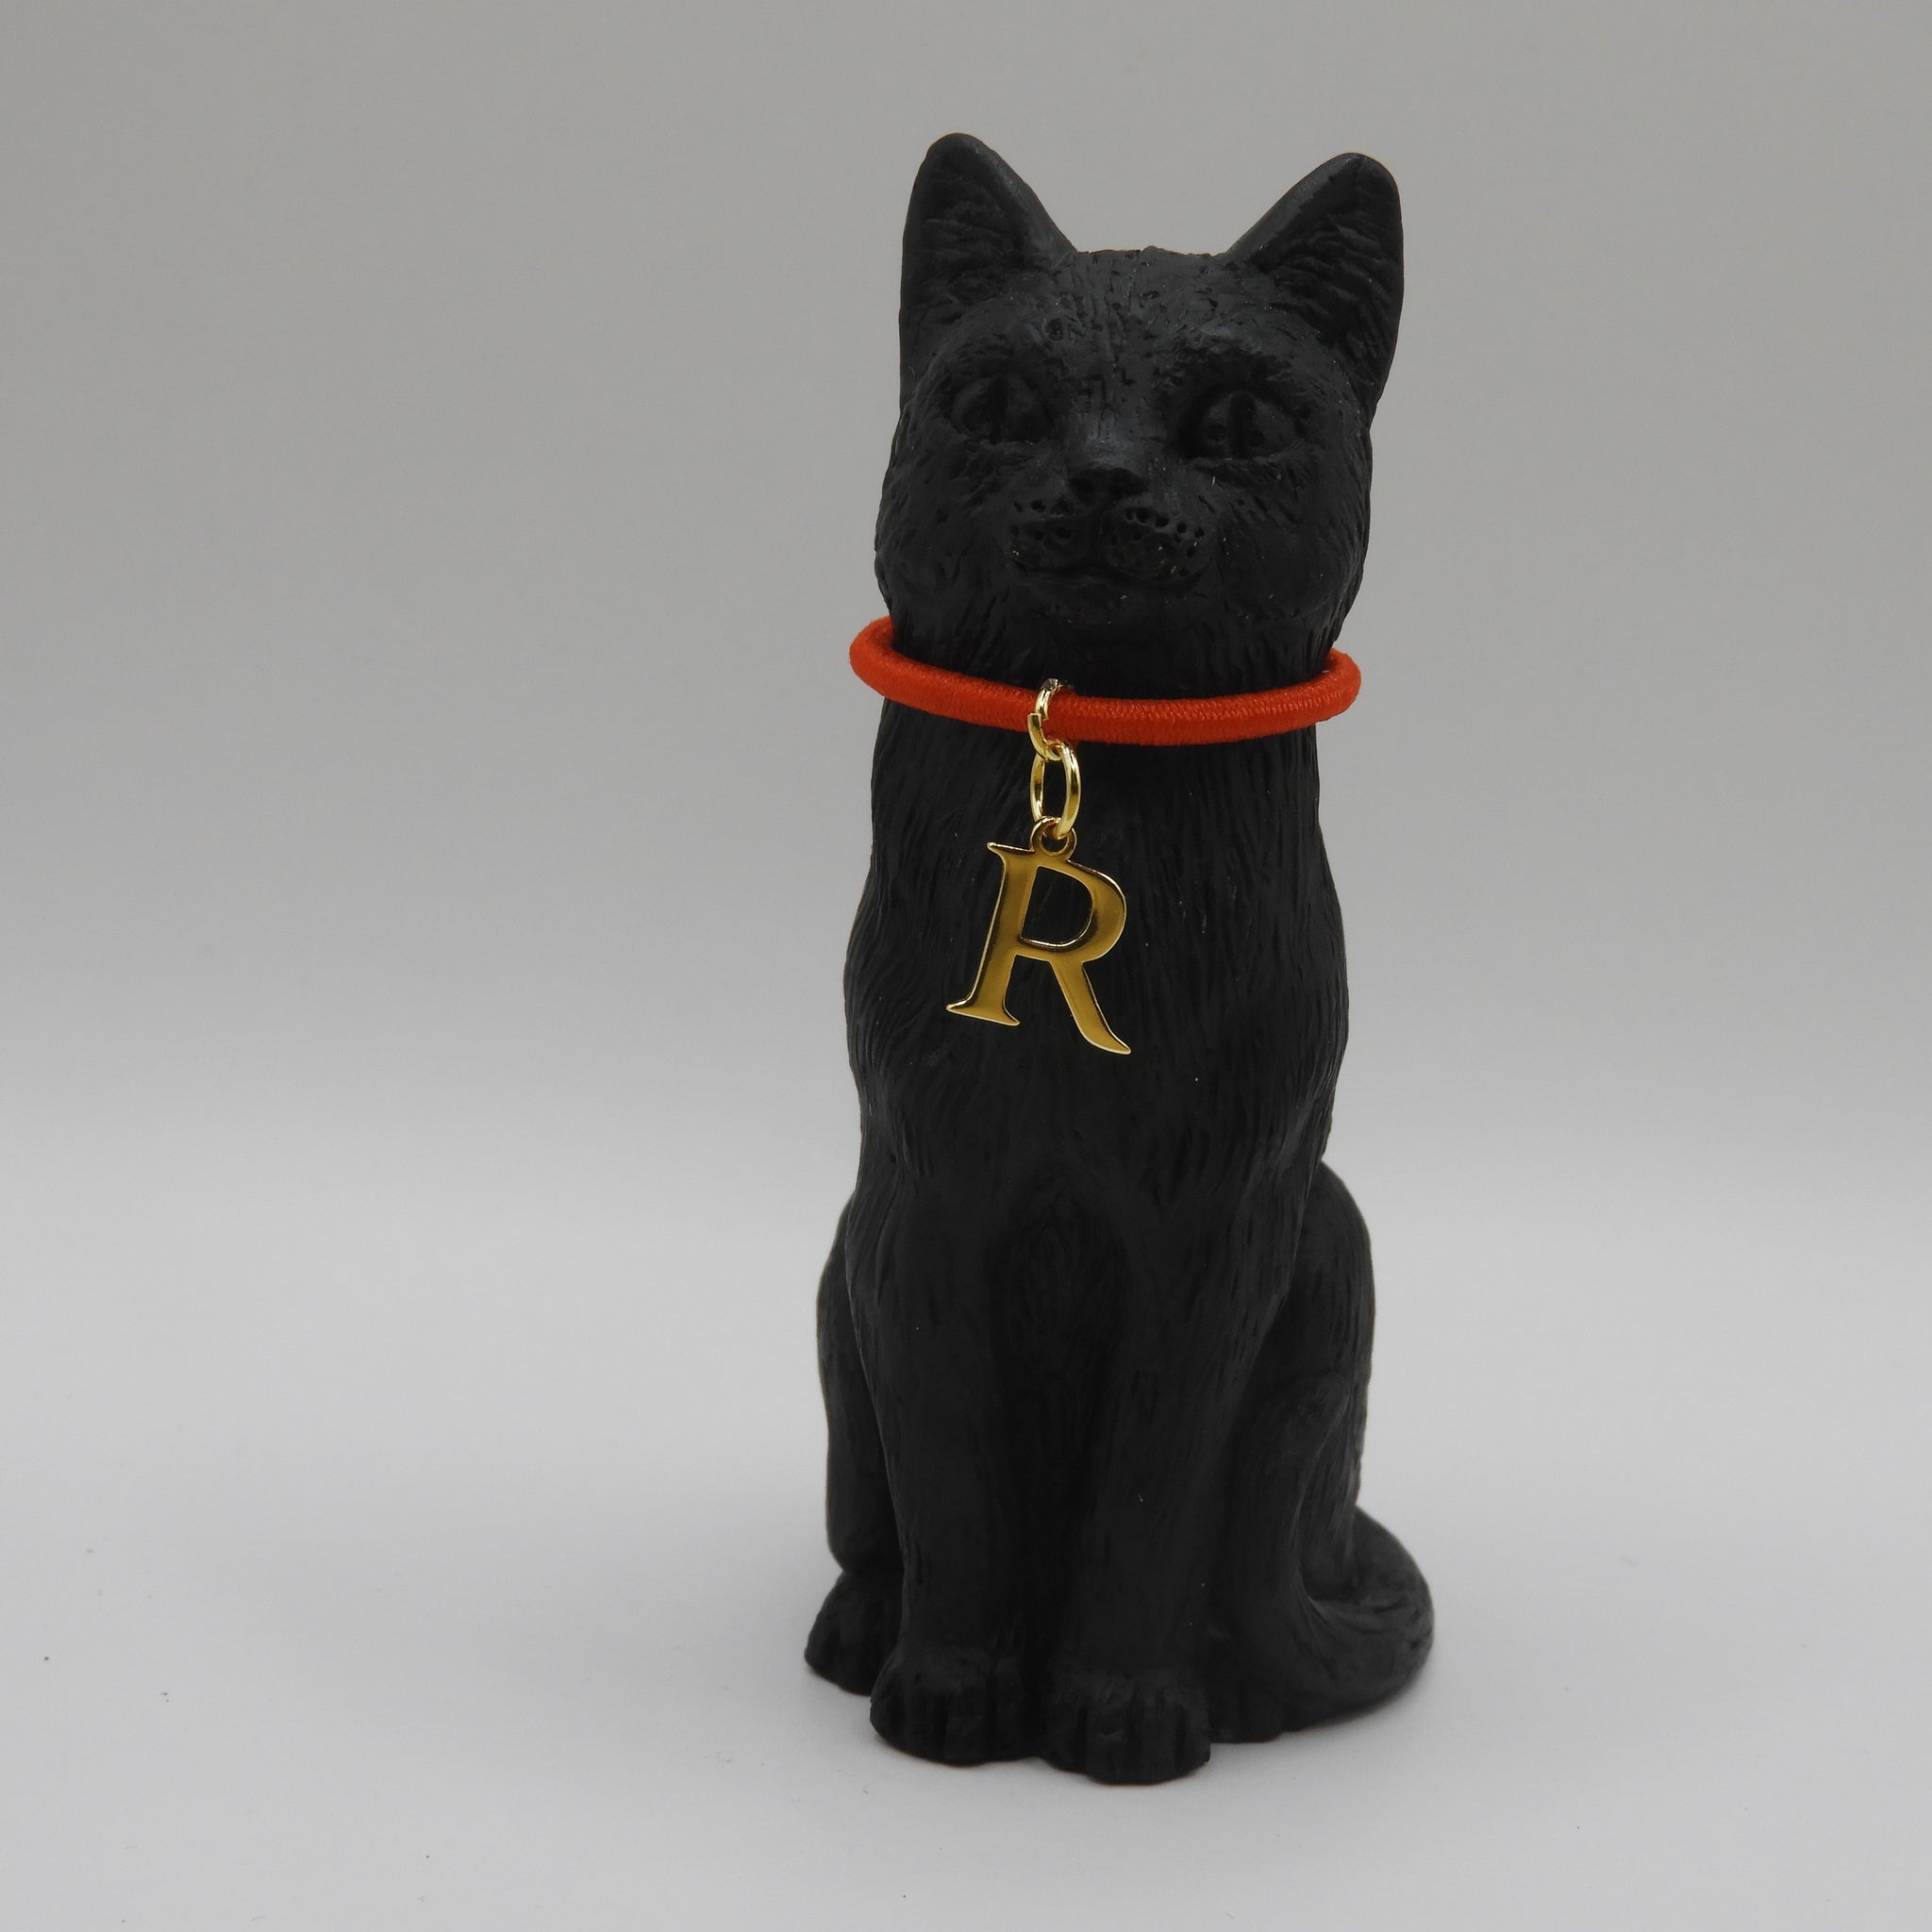 8cm Original Lucky Cat with Initial R Charm